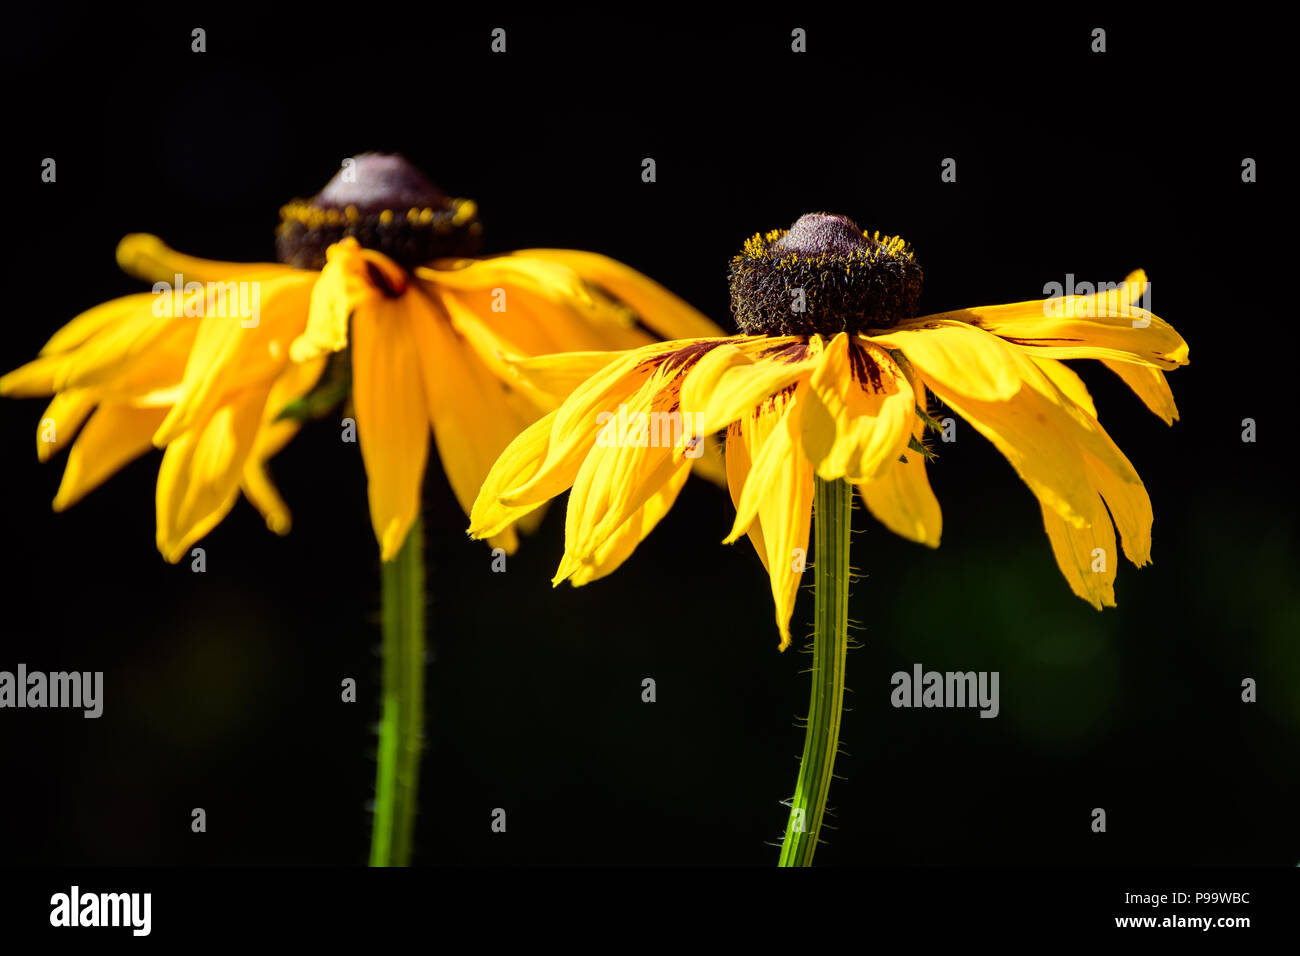 Healthy vibrant golden yellow Black Eyed Susan Flowers, isolated. Stock Photo